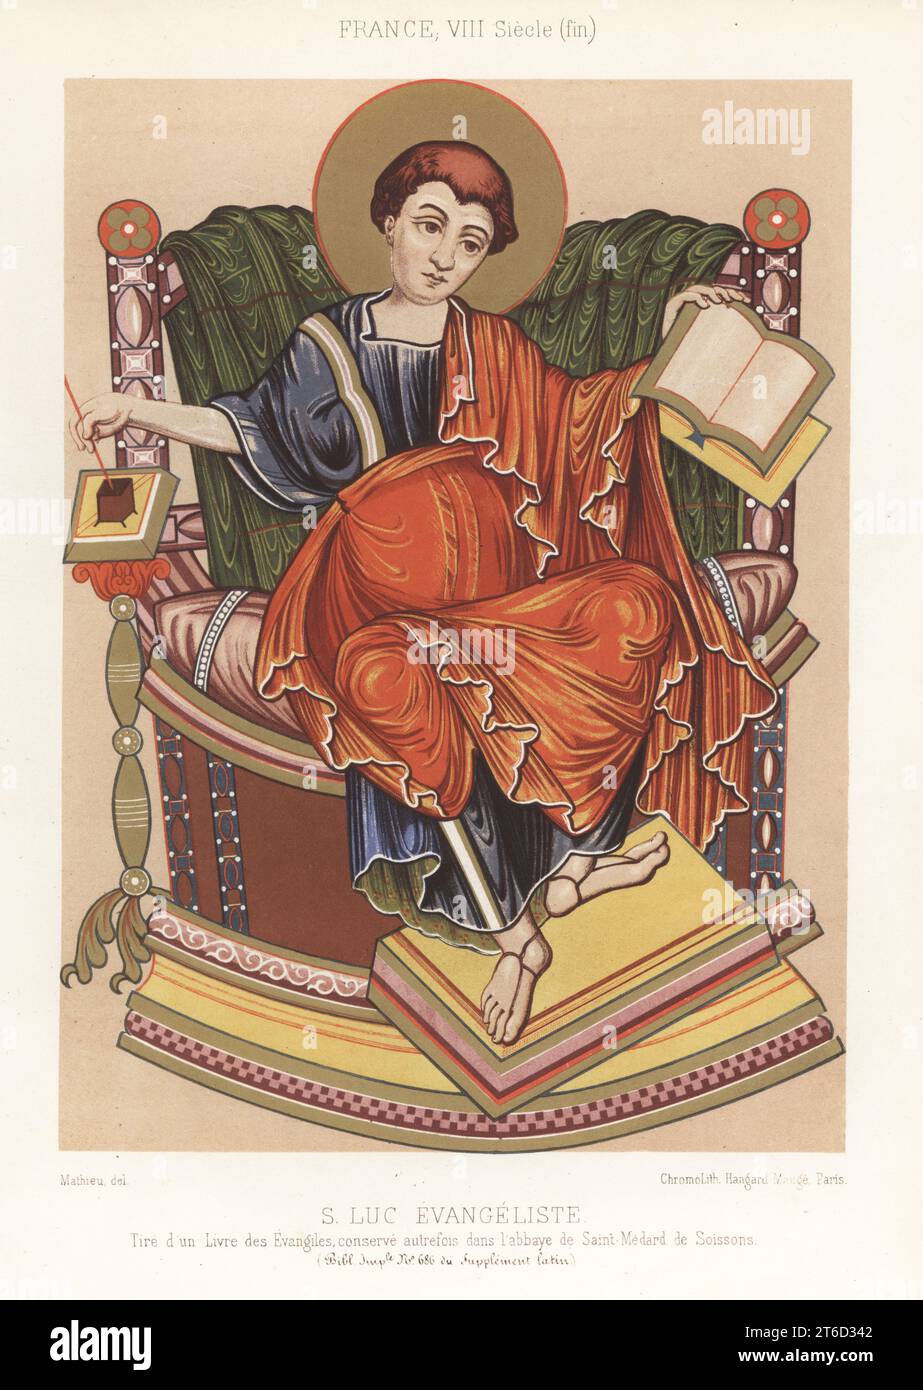 Luke the Evangelist, one of the four authors of the gospels, c.9-93 AD. Seated on a chair, right hand dipping a quill pen in an inkwell and left hand holding a book. Wearing late 8th century French costume. S. Luc Evangeliste, France, VIIIe siecle (fin). Taken from a manuscript formerly kept at the Abbey of Saint-Medard de Soissons. MS 686 Sup. Latin, Bibliotheque Imperiale. Chromolithograph after Mathieu from Charles Louandres Les Arts Somptuaires, The Sumptuary Arts, Hangard-Mauge, Paris, 1858. Stock Photo